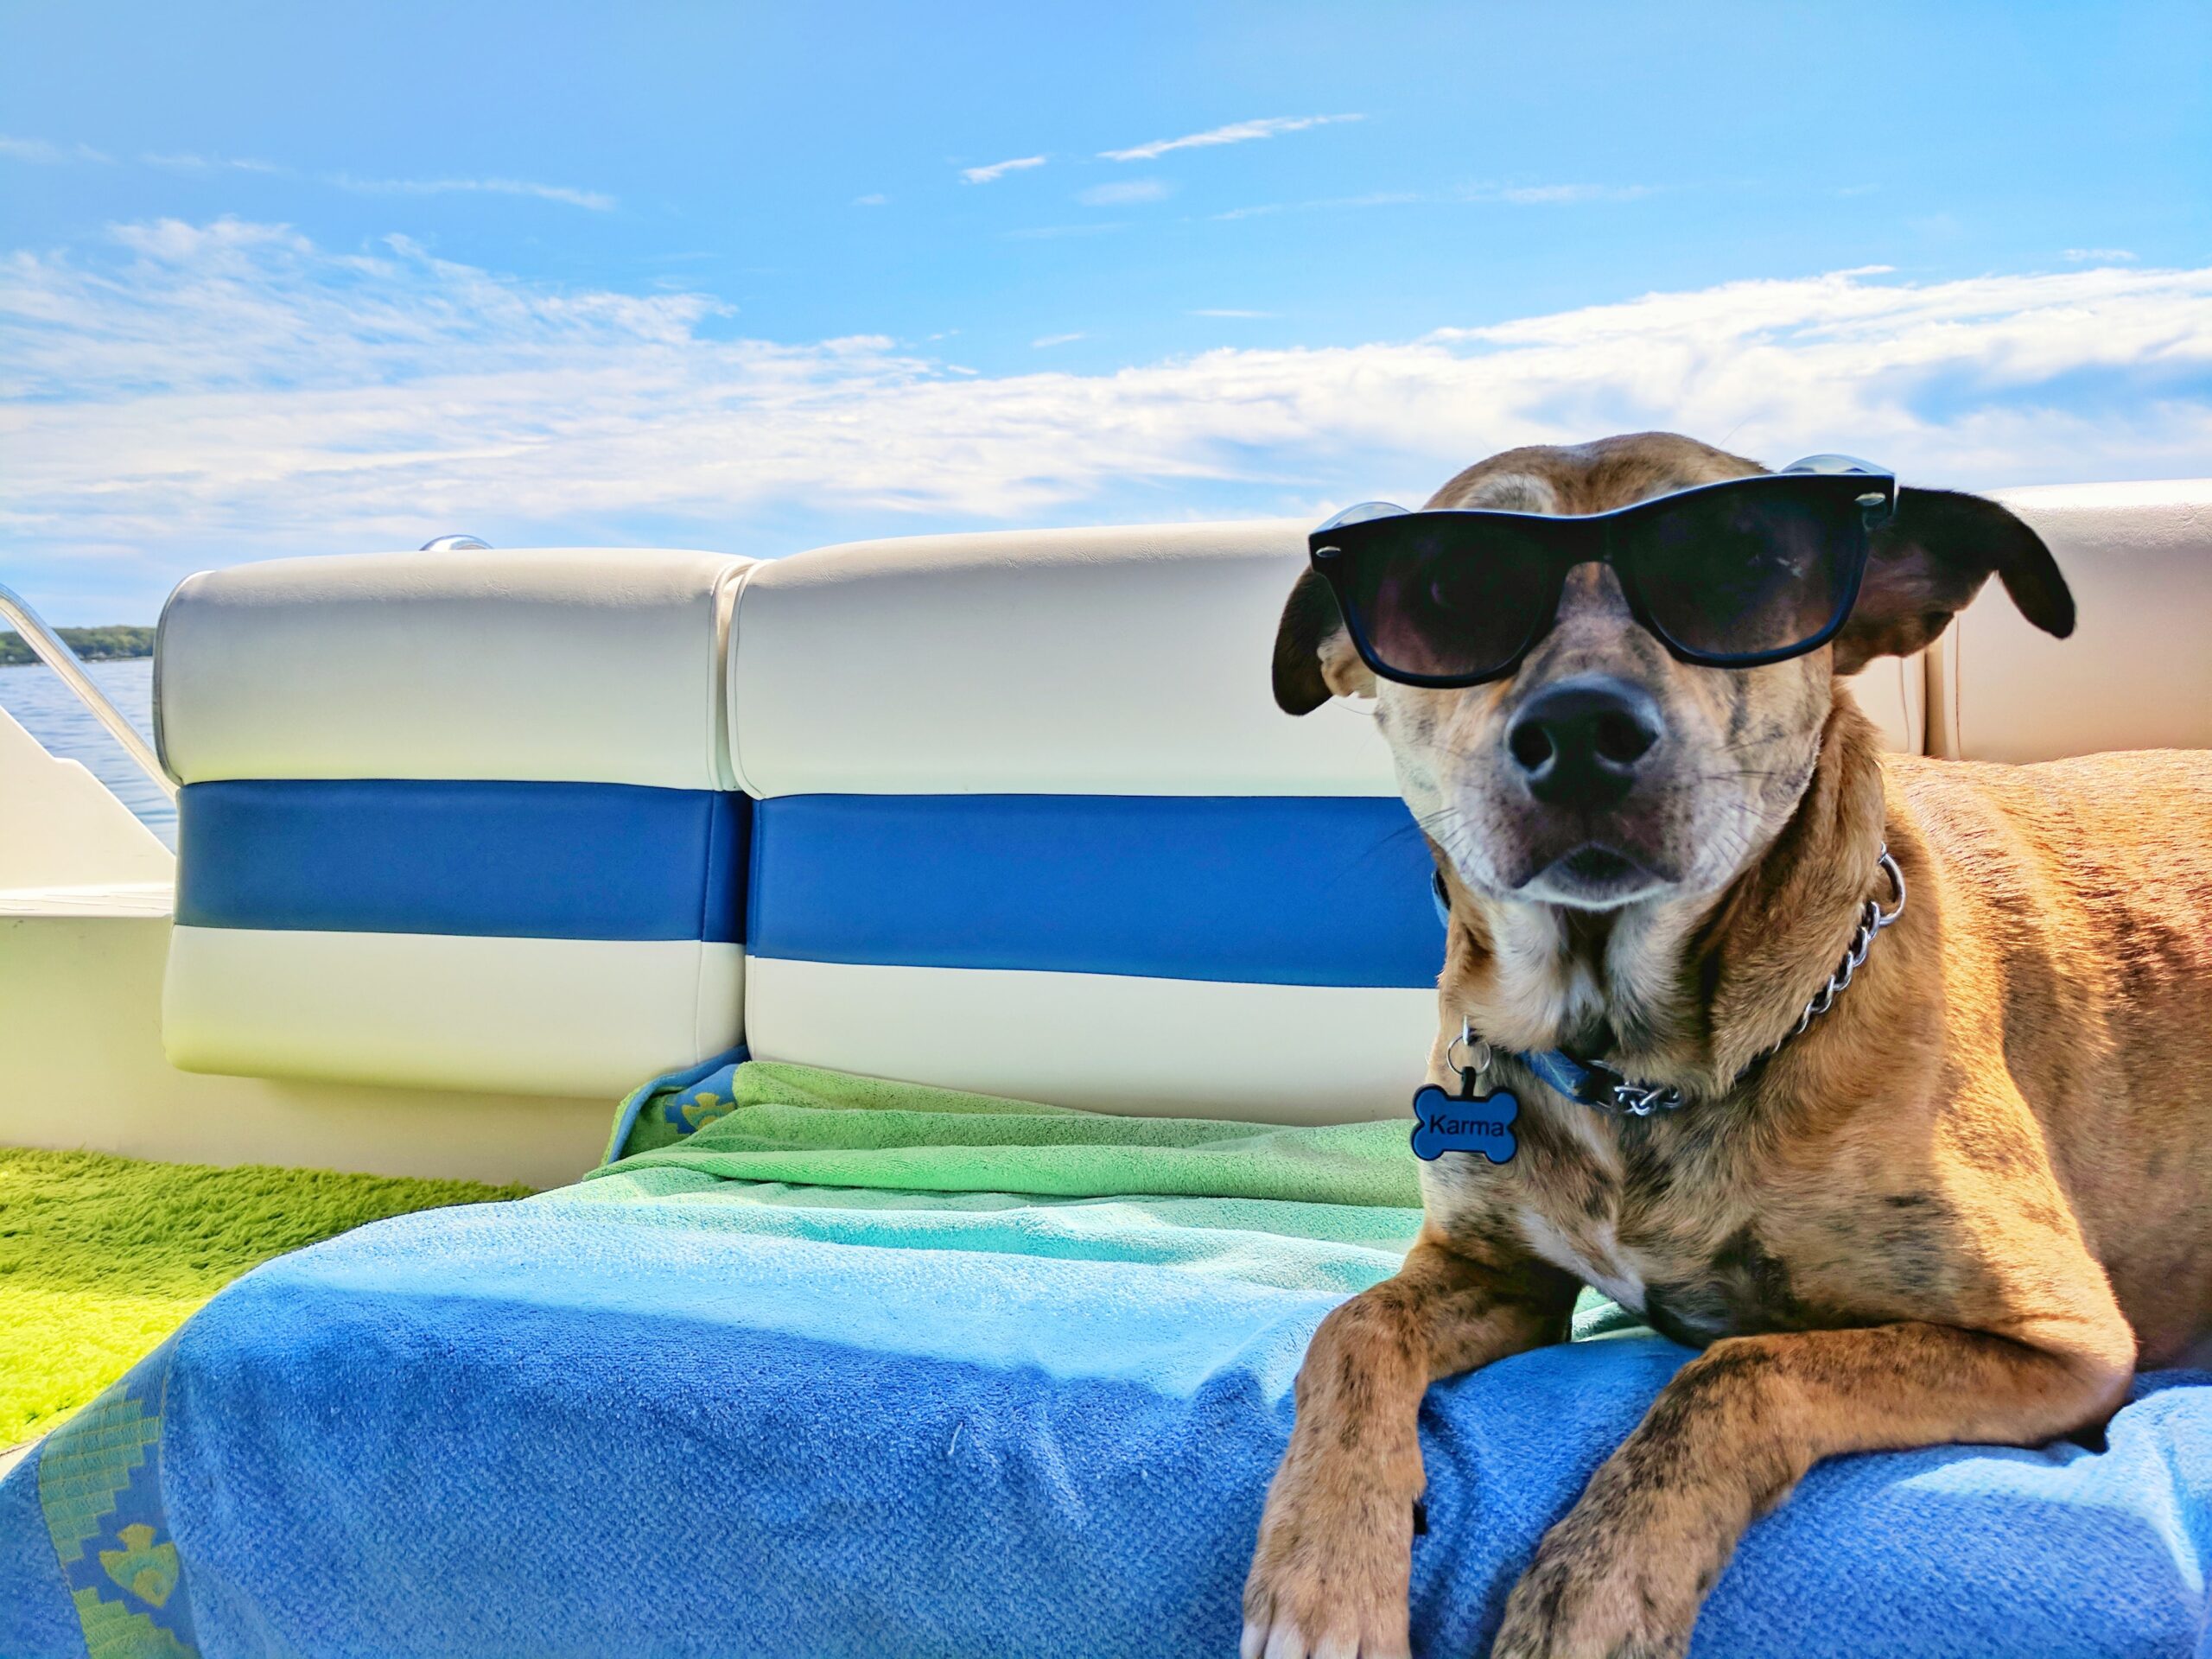 A dog on board a boat with some cool sunglasses on. He is the coolest dog. I would let him be the captain.